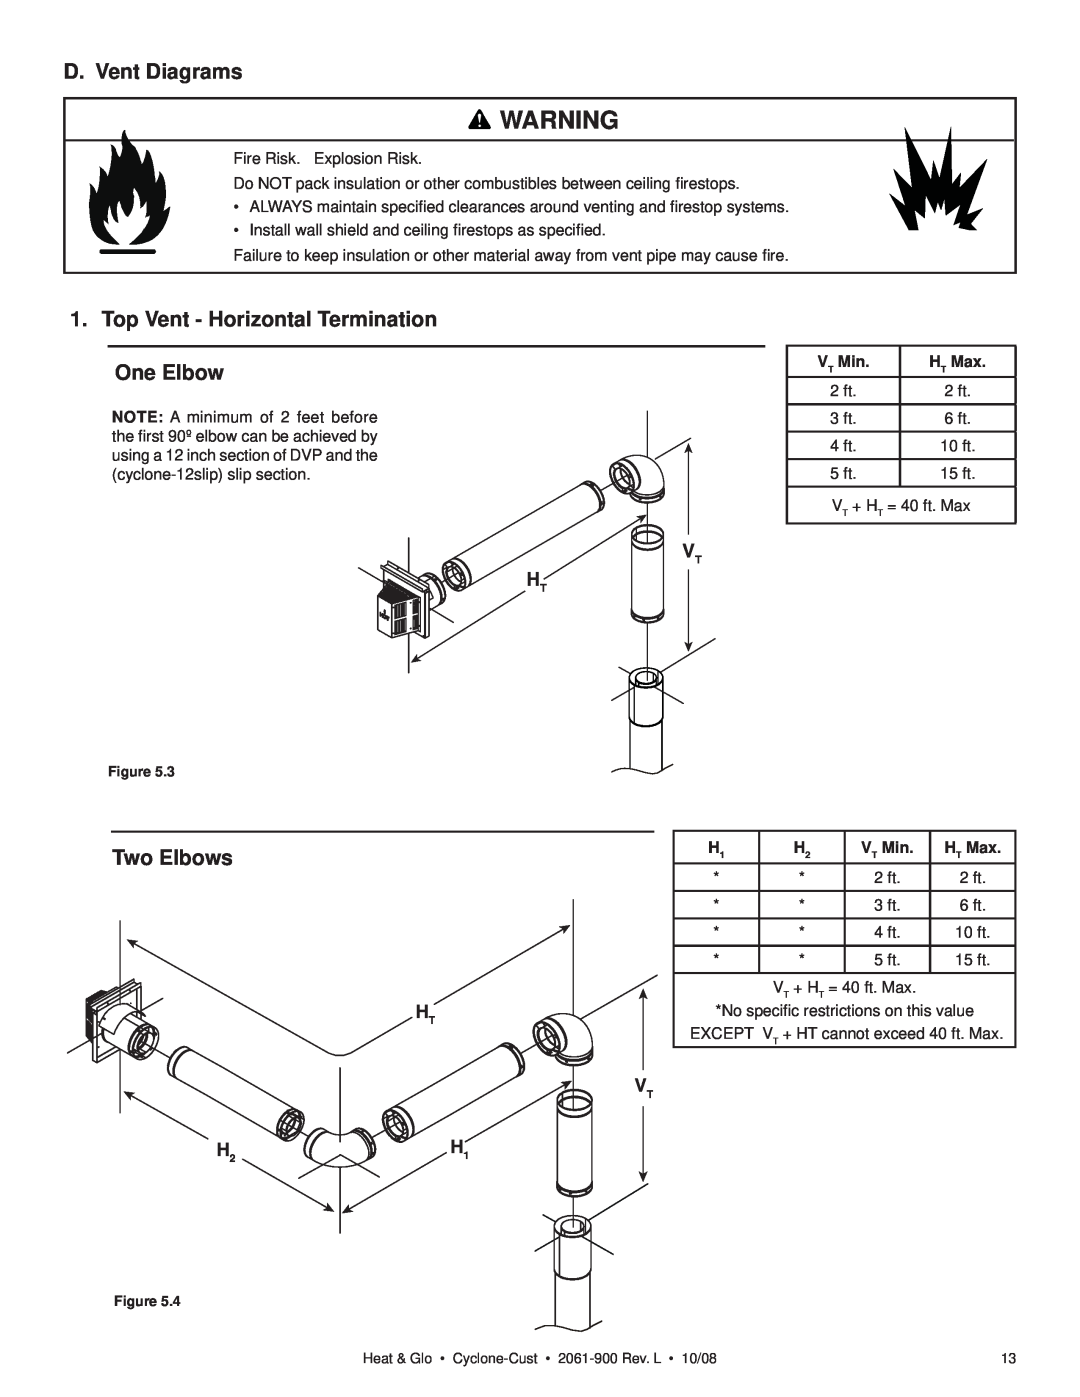 Hearth and Home Technologies Cyclone-Cust D. Vent Diagrams, Top Vent - Horizontal Termination One Elbow, Two Elbows, Vt Ht 